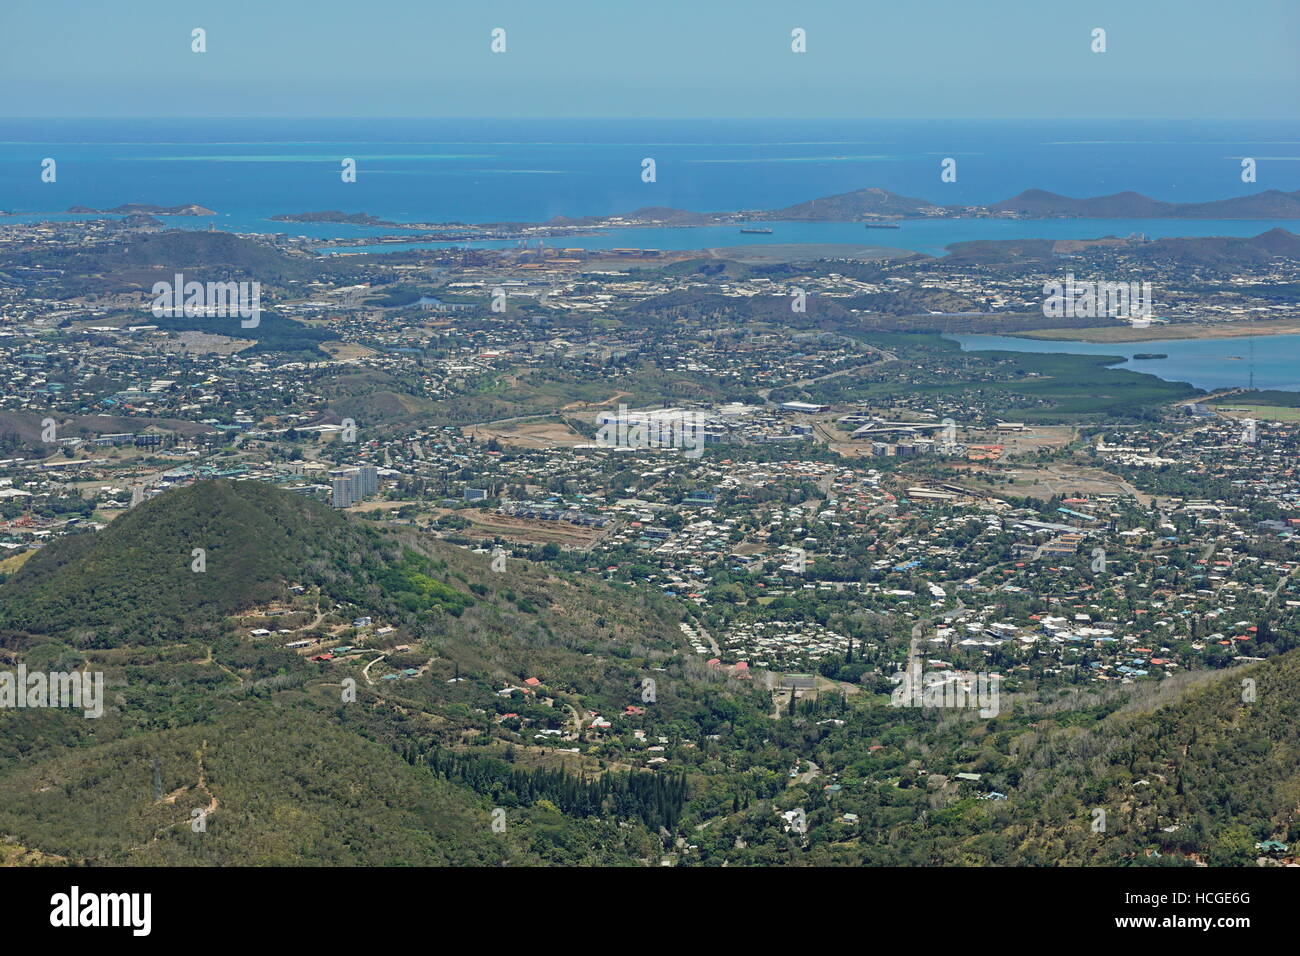 Aerial view of Noumea city on the southwest coast of New Caledonia island, south Pacific ocean Stock Photo